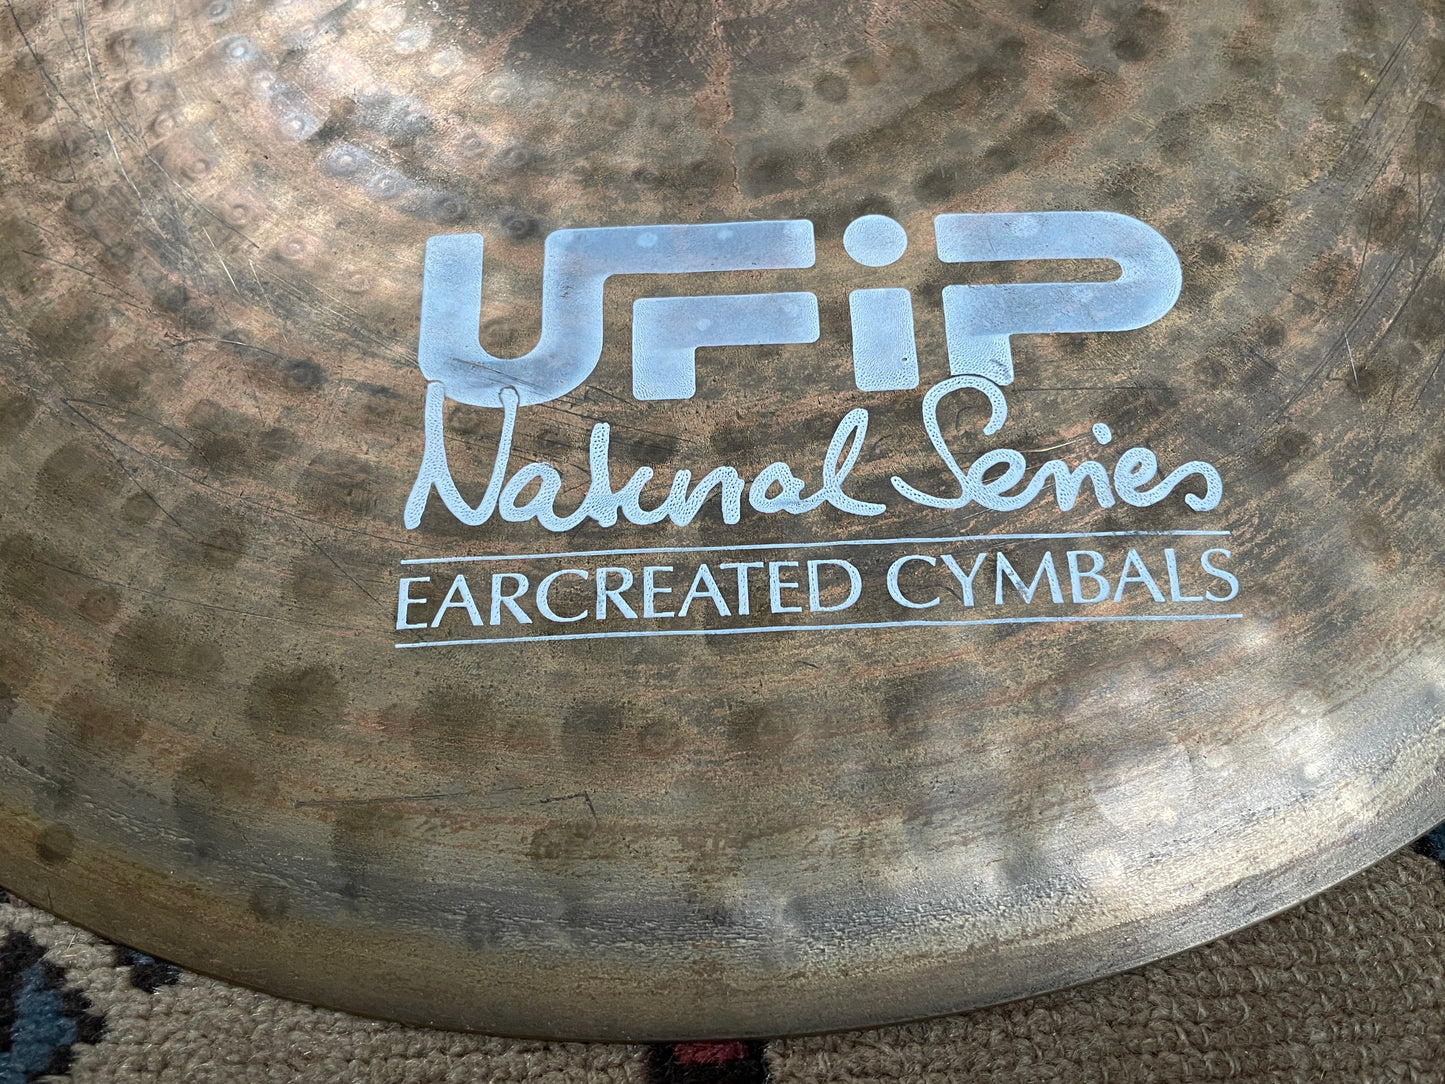 20" UFIP Natural Series Ride Cymbal 2215g *Video Demo*